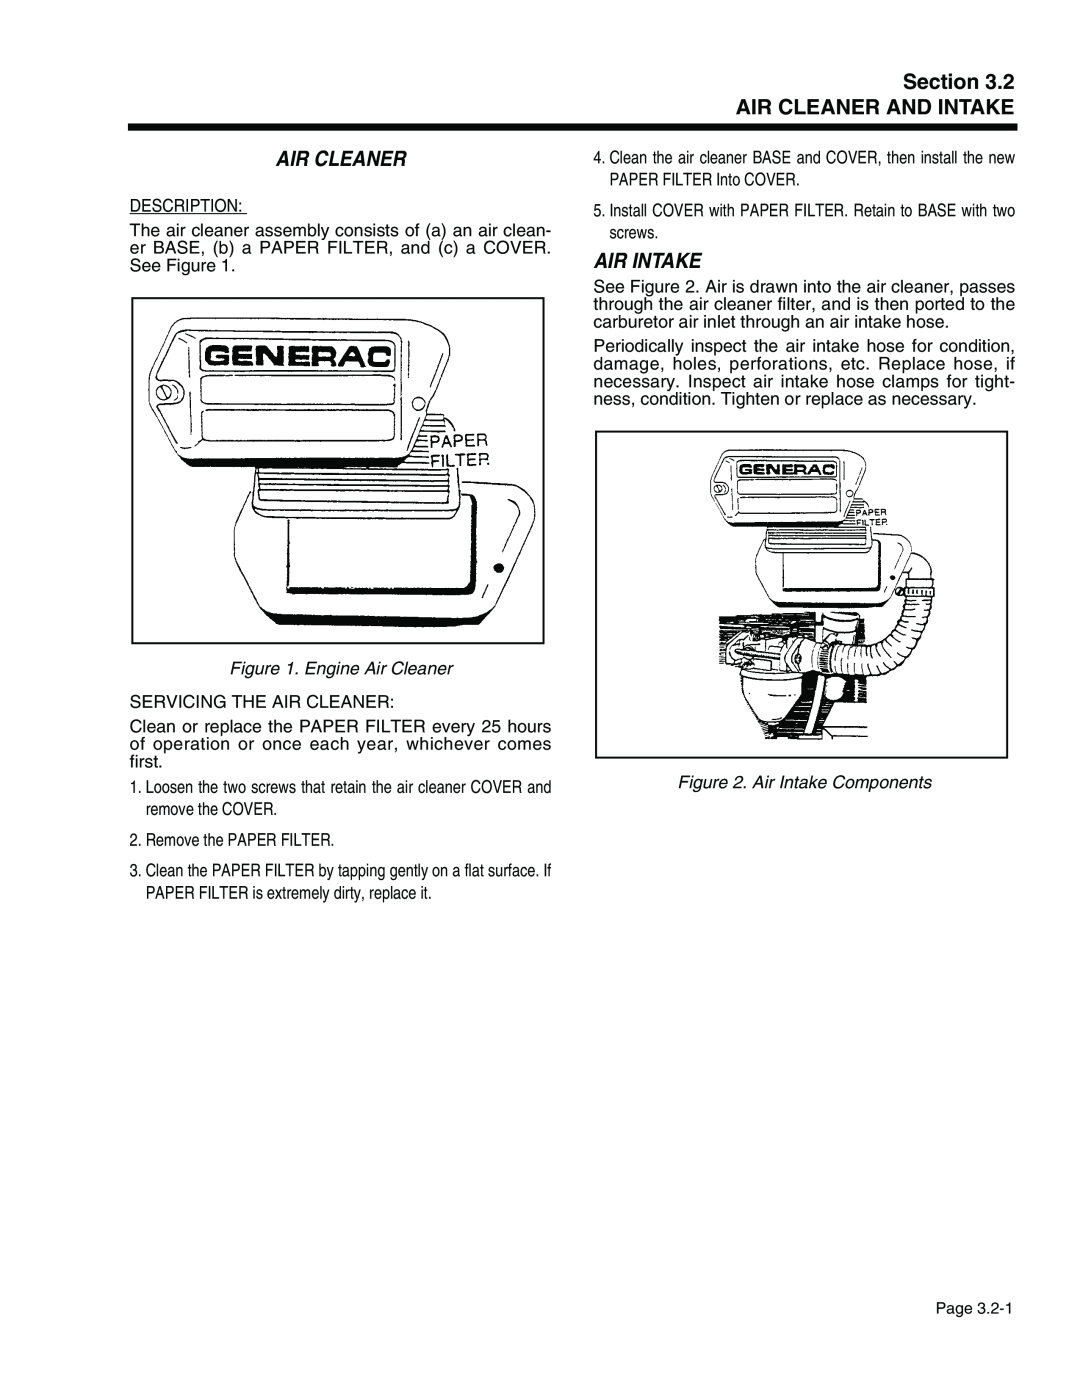 Generac Power Systems 941-2, 940-2 Section AIR CLEANER AND INTAKE, Engine Air Cleaner, Air Intake Components 